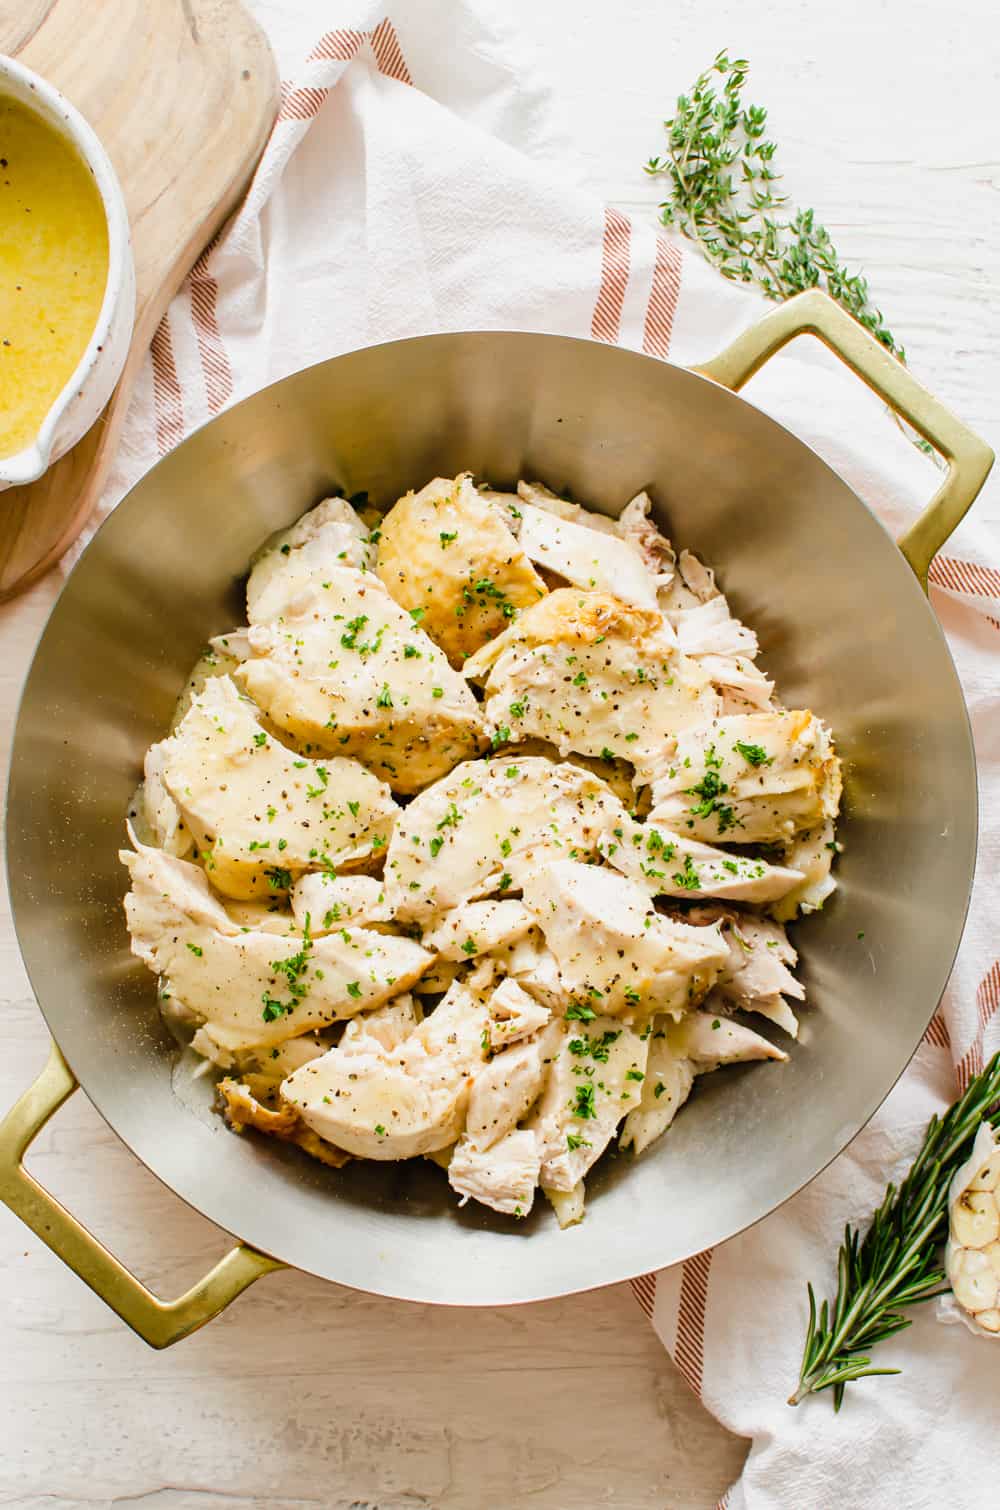 Sliced whole chicken on a serving platter with chopped parsley sprinkled on top.